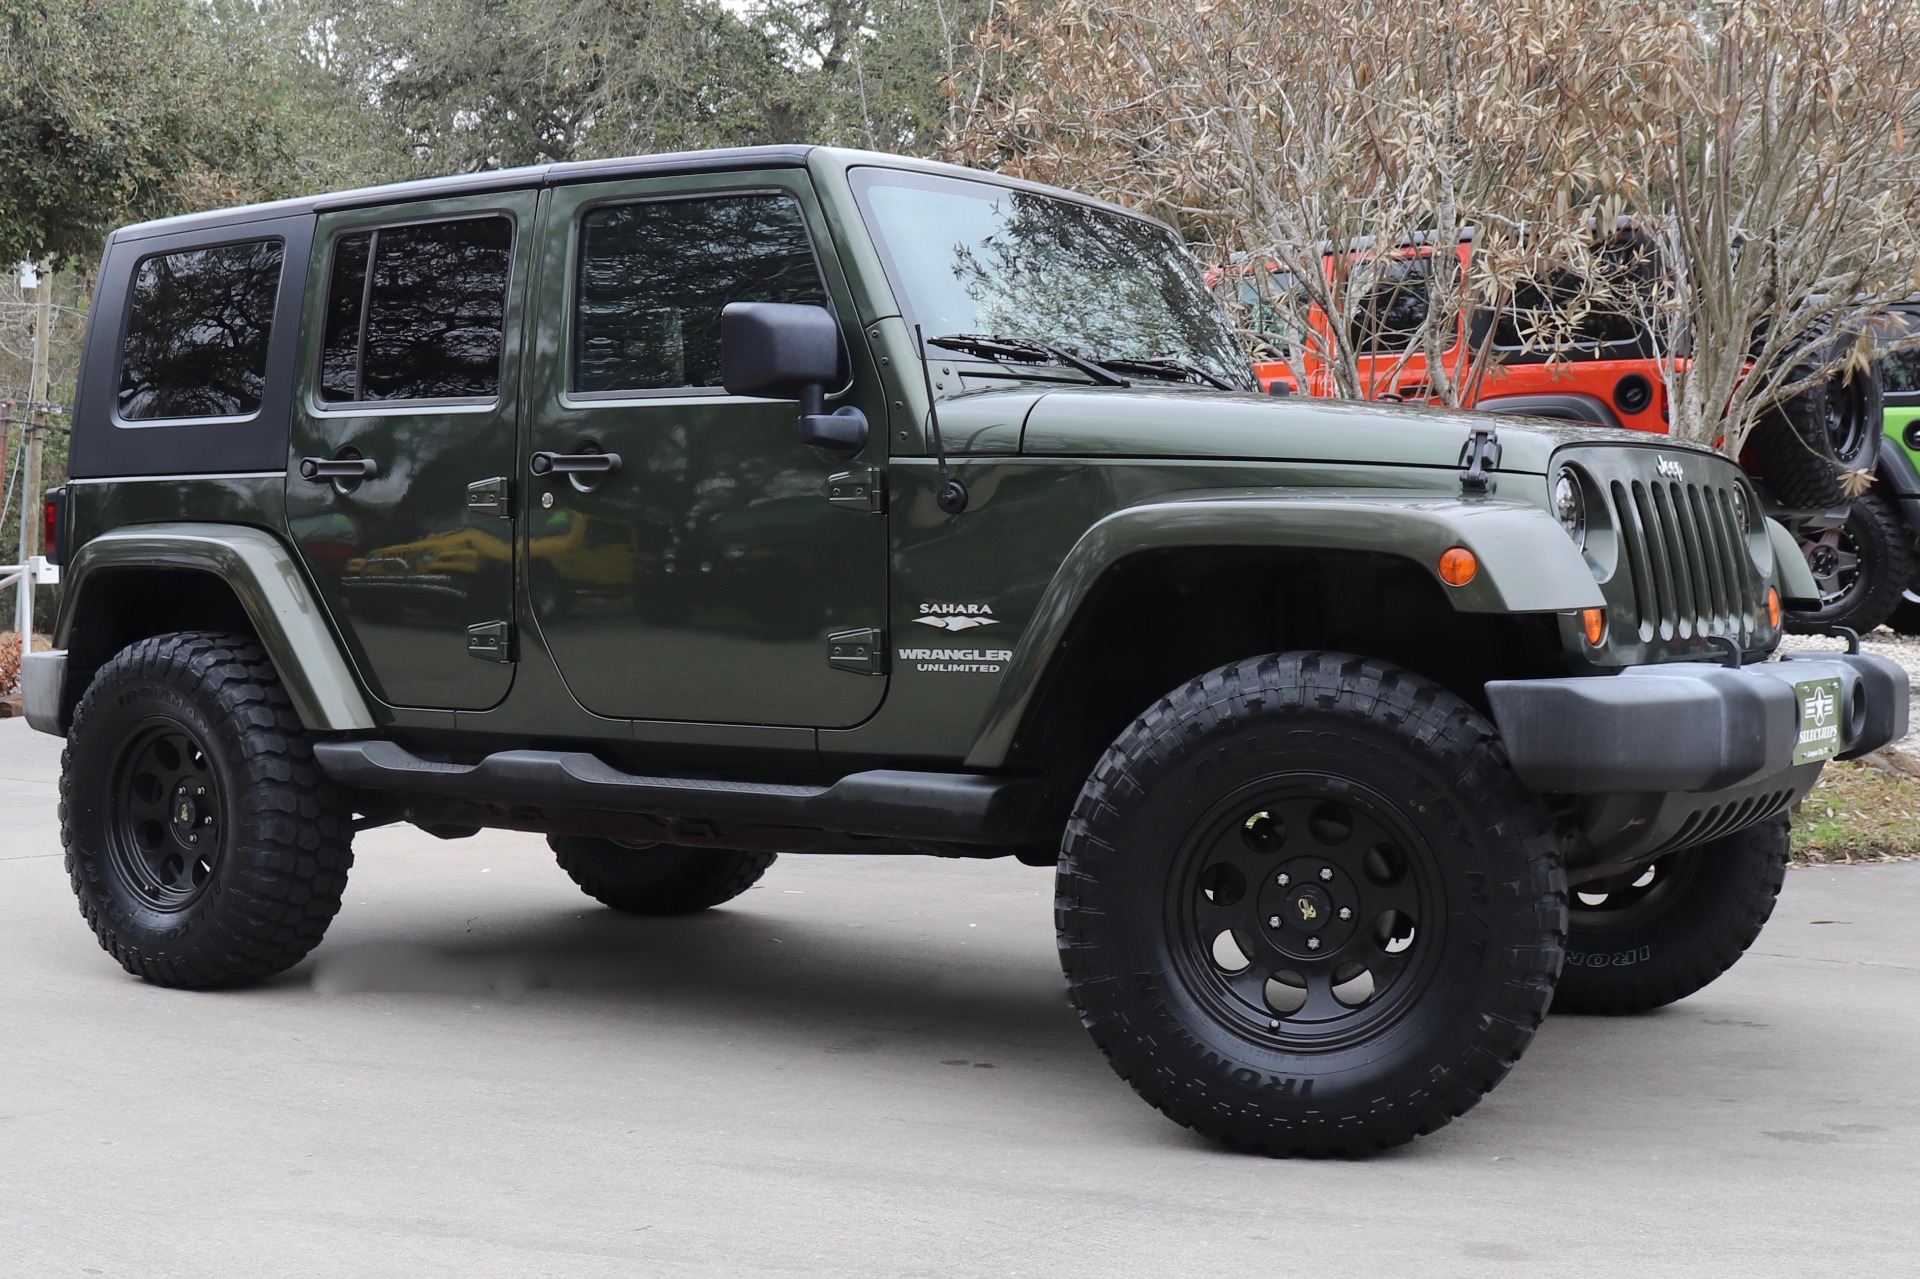 Used 2007 Jeep Wrangler Unlimited Sahara For Sale ($17,995) | Select Jeeps  Inc. Stock #210737